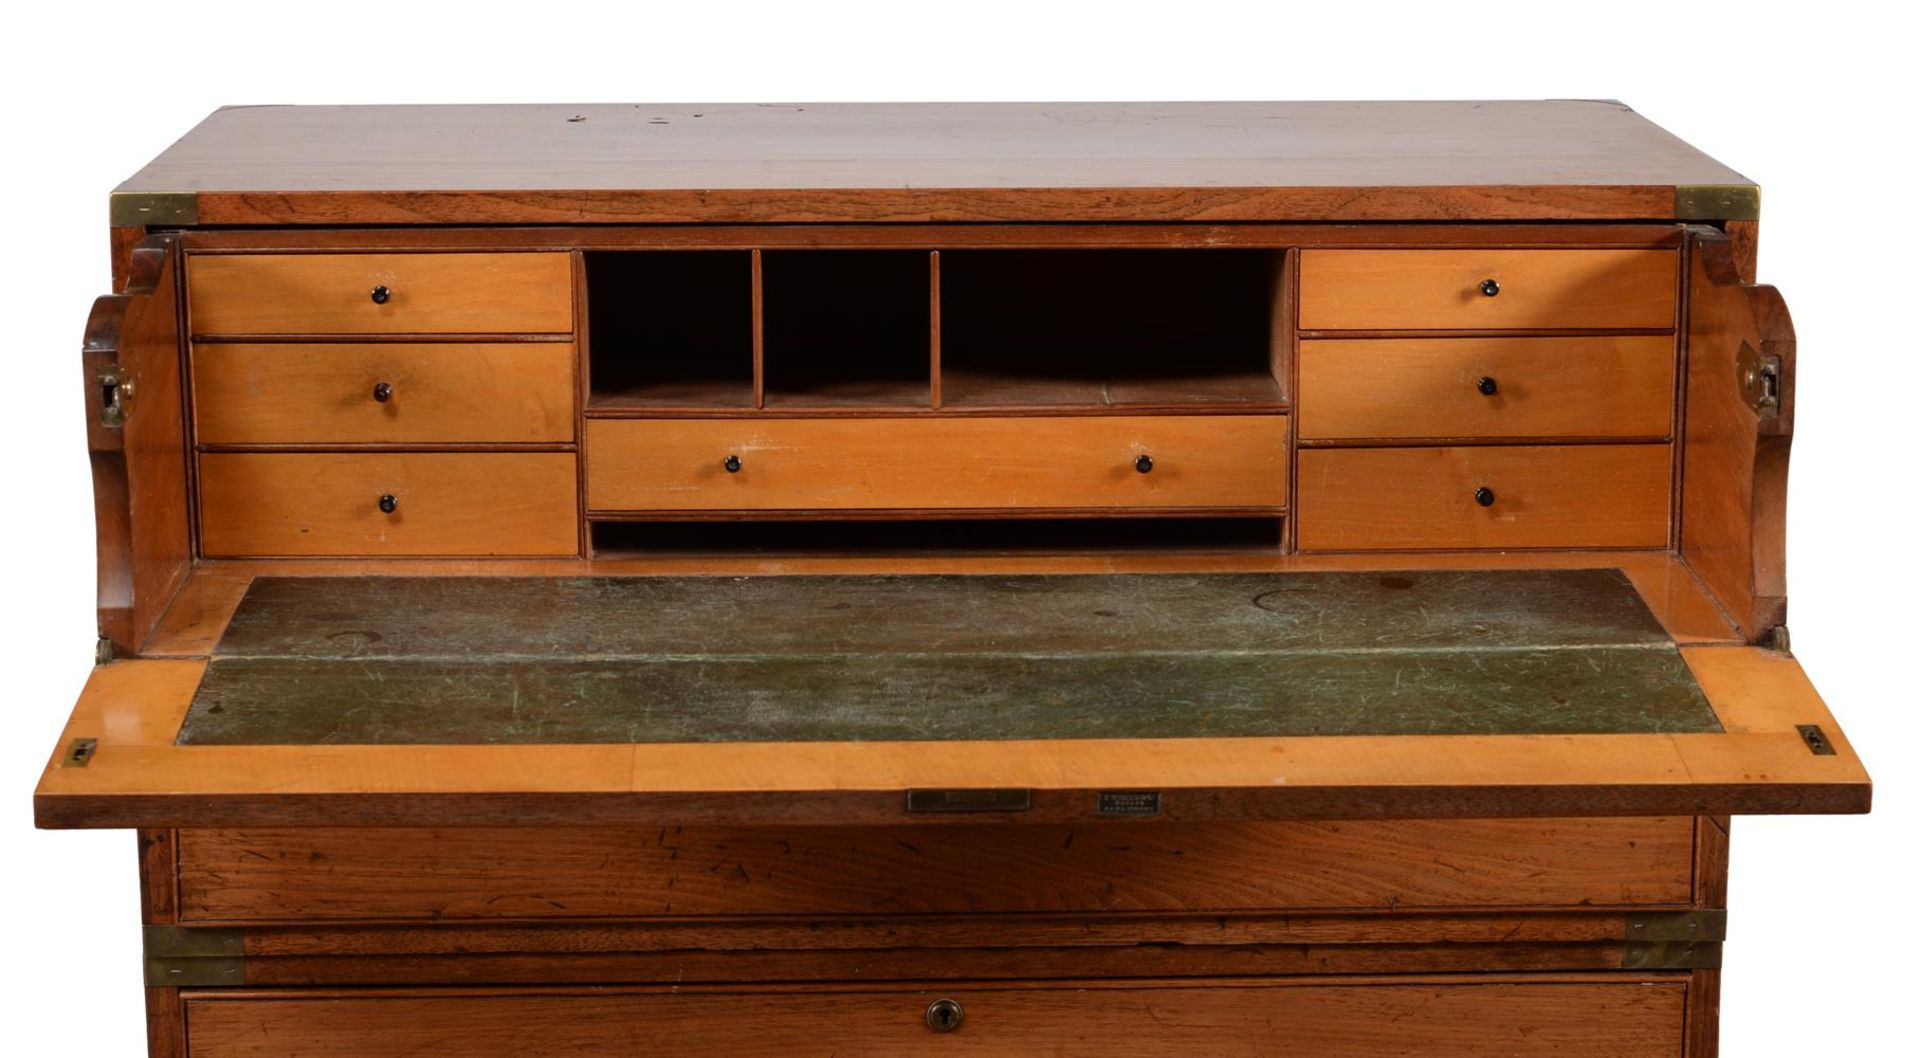 A VICTORIAN TEAK AND BRASS BOUND SECRETAIRE CAMPAIGN CHEST, BY T WHITE & CO, MID 19TH CENTURY - Image 3 of 6